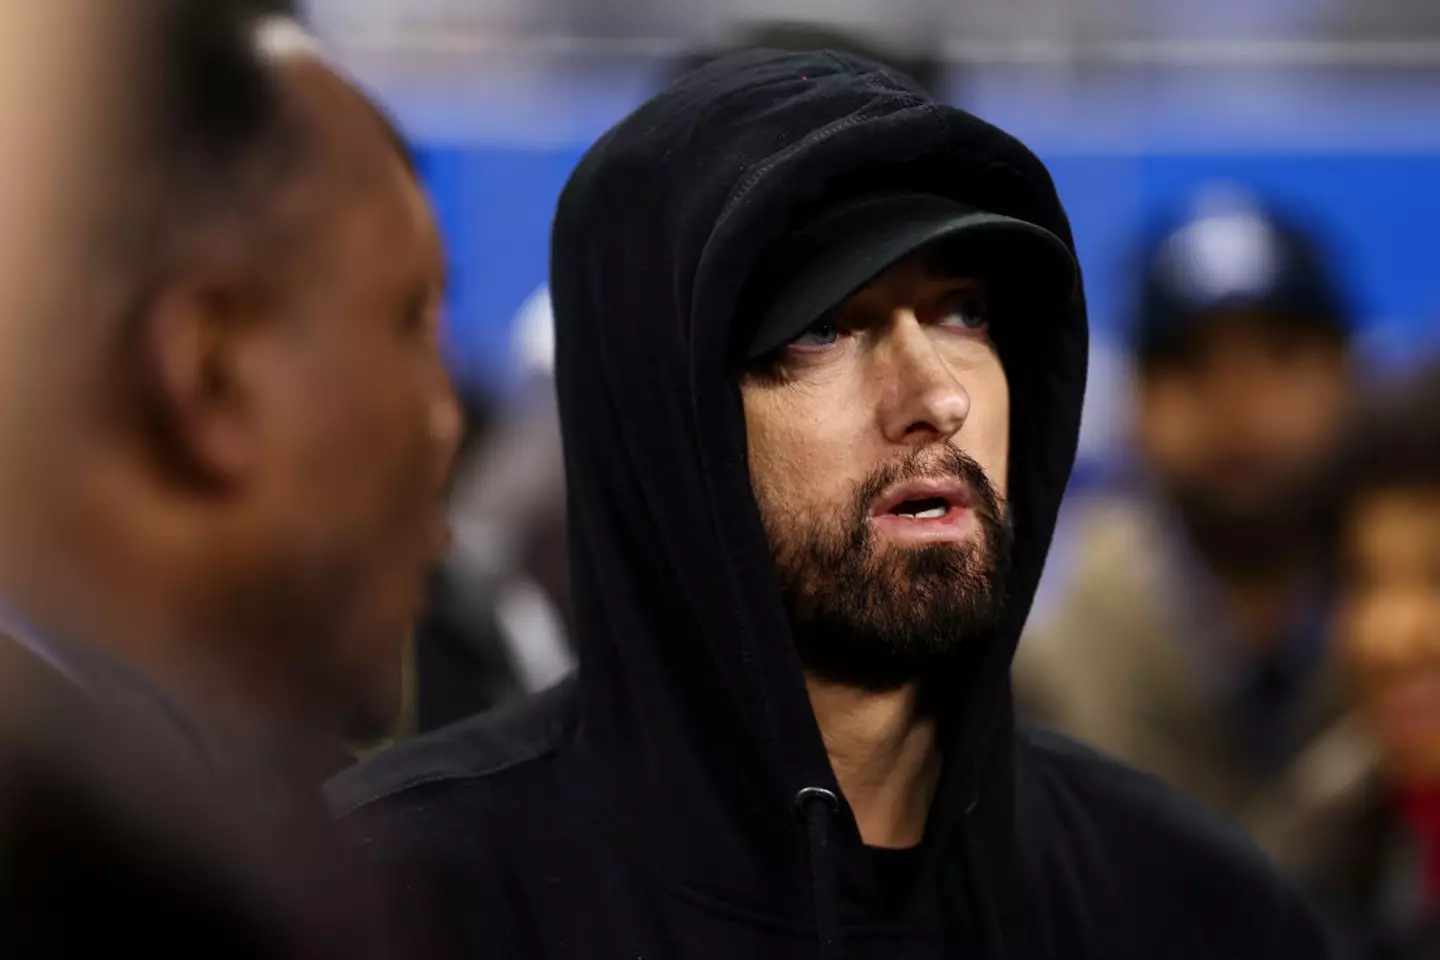 There's one song that Eminem won't perform anymore.